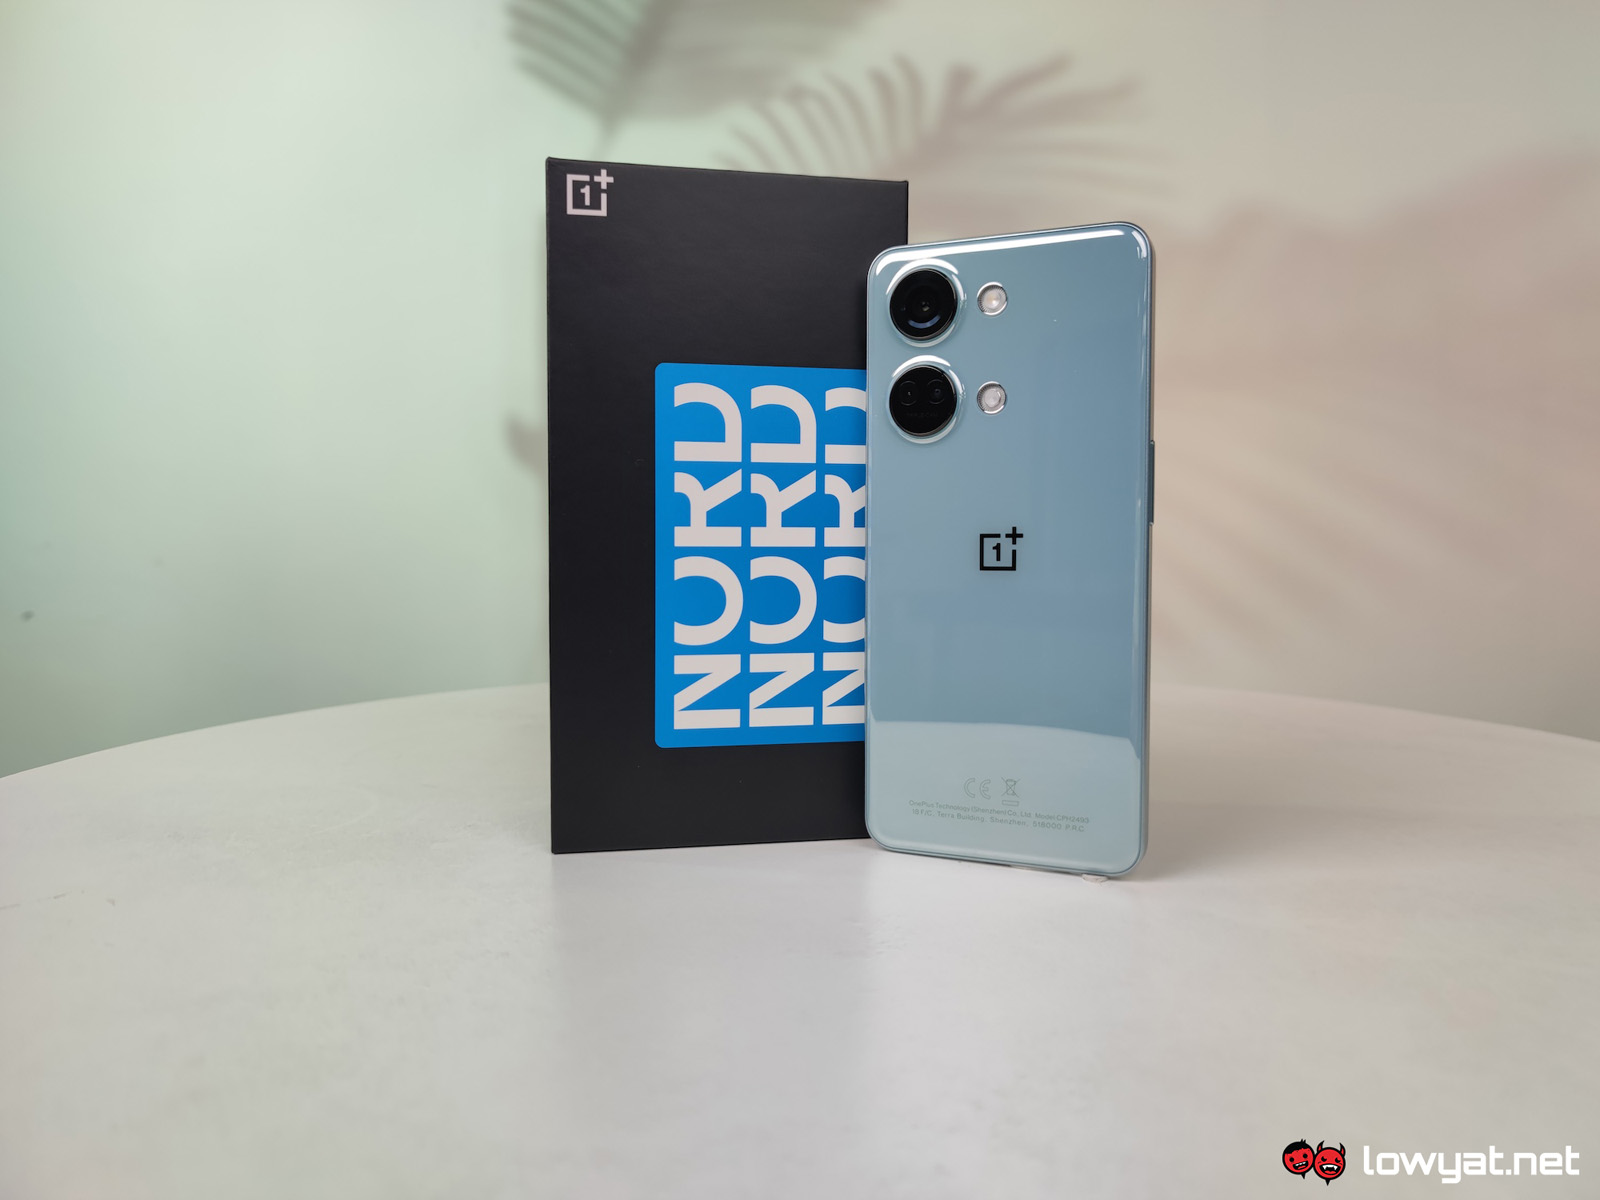 OnePlus Nord 3 5G – Camera Test 